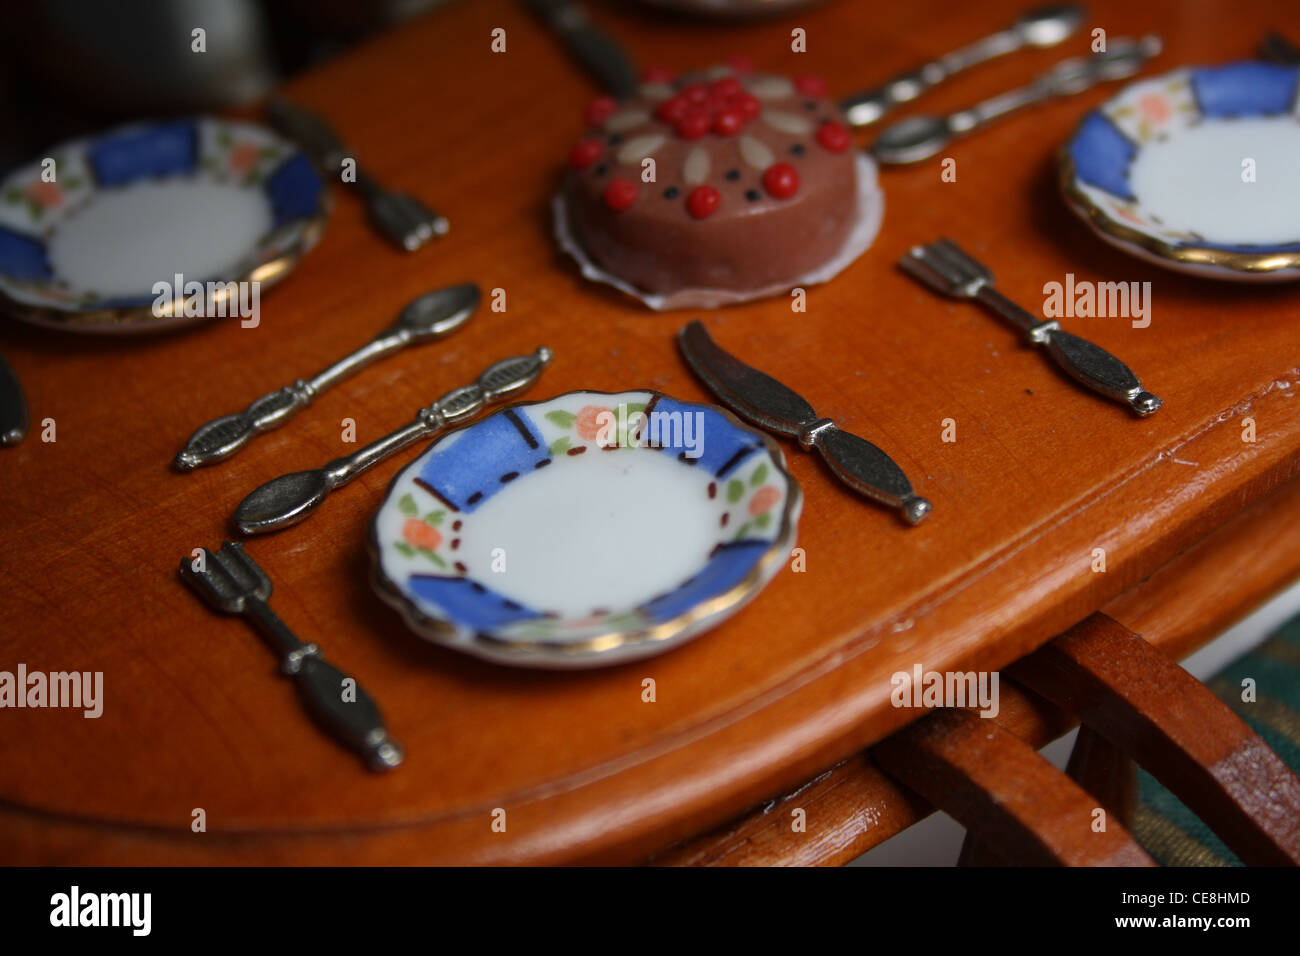 Dolls house dining table. Stock Photo